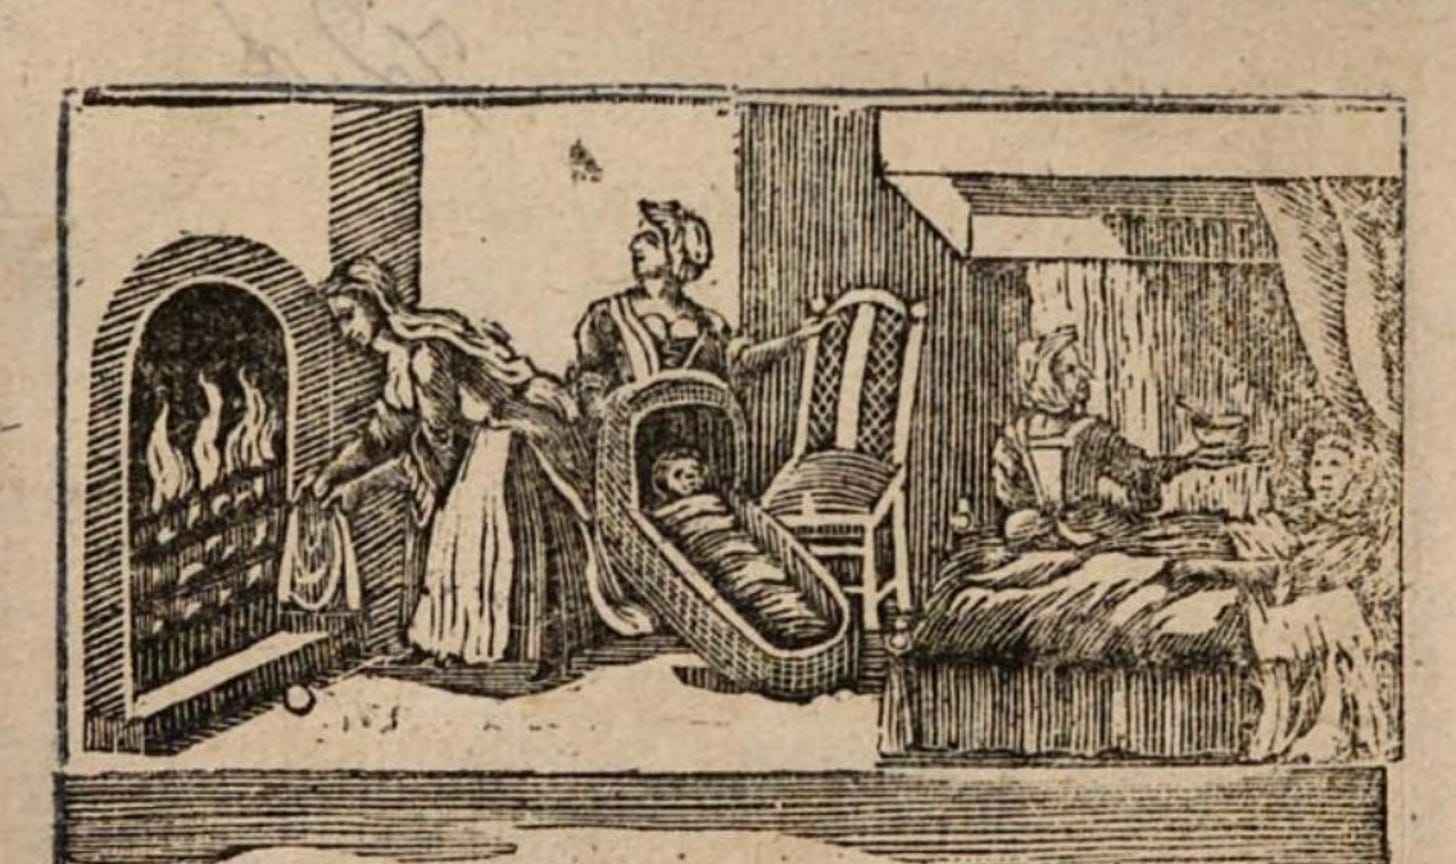 An 18th-century woodcut illustration showing a baby swaddled in a cradle and its mother in bed, being offered a bowl of food by a woman who sits at the side of the bed. Two other women are in the room - one standing behind the cradle and the other drying a piece of material at the large fireplace.